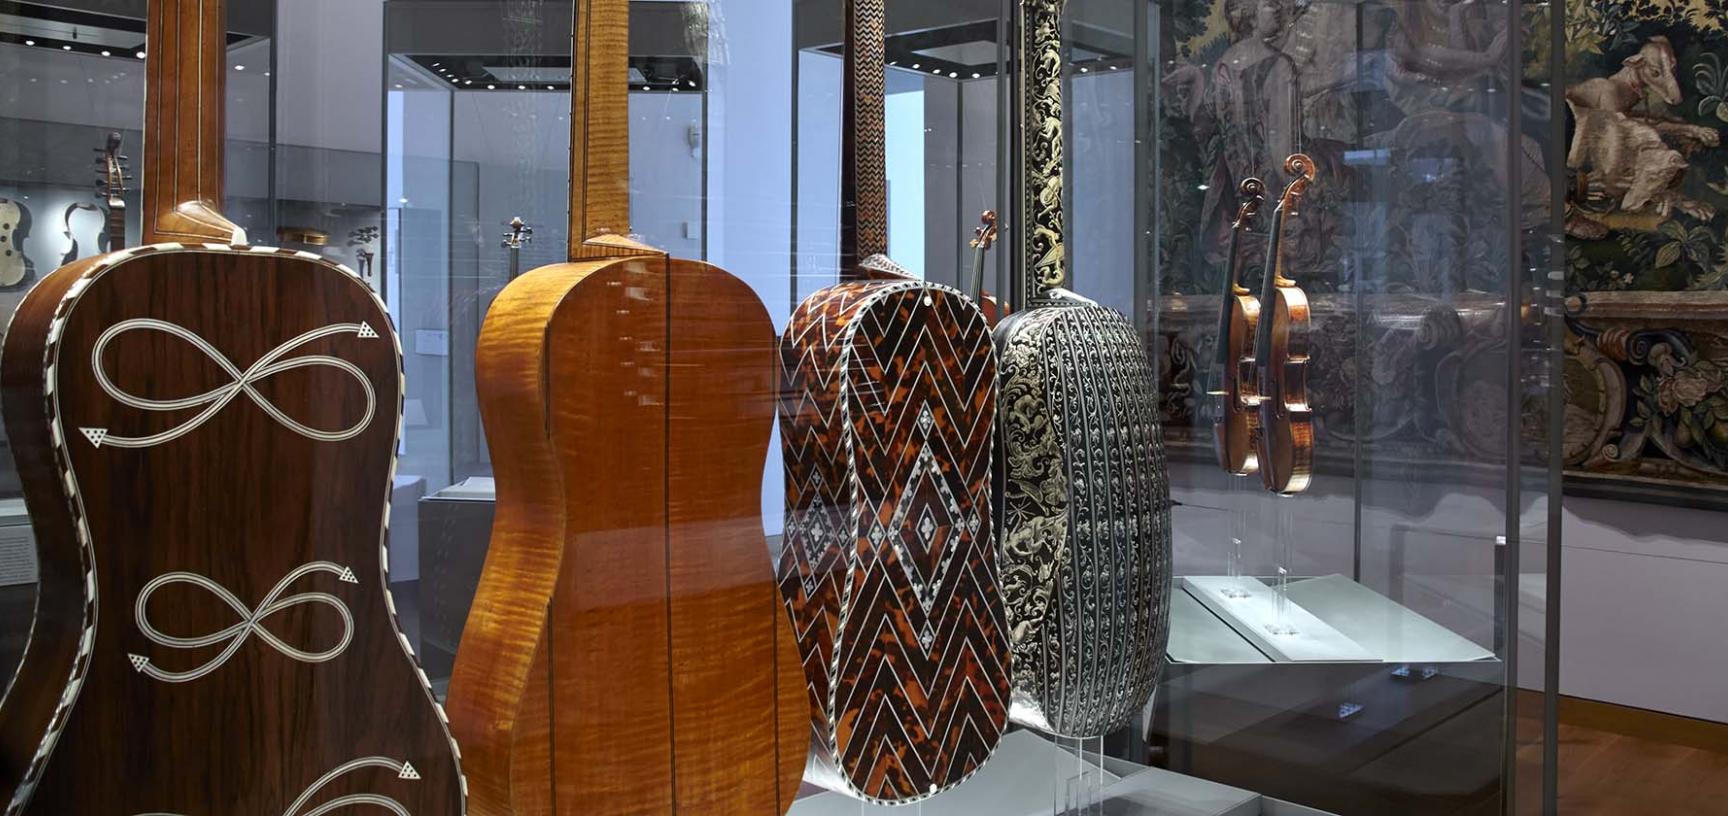 Musical Instruments Gallery at the Ashmolean Museum